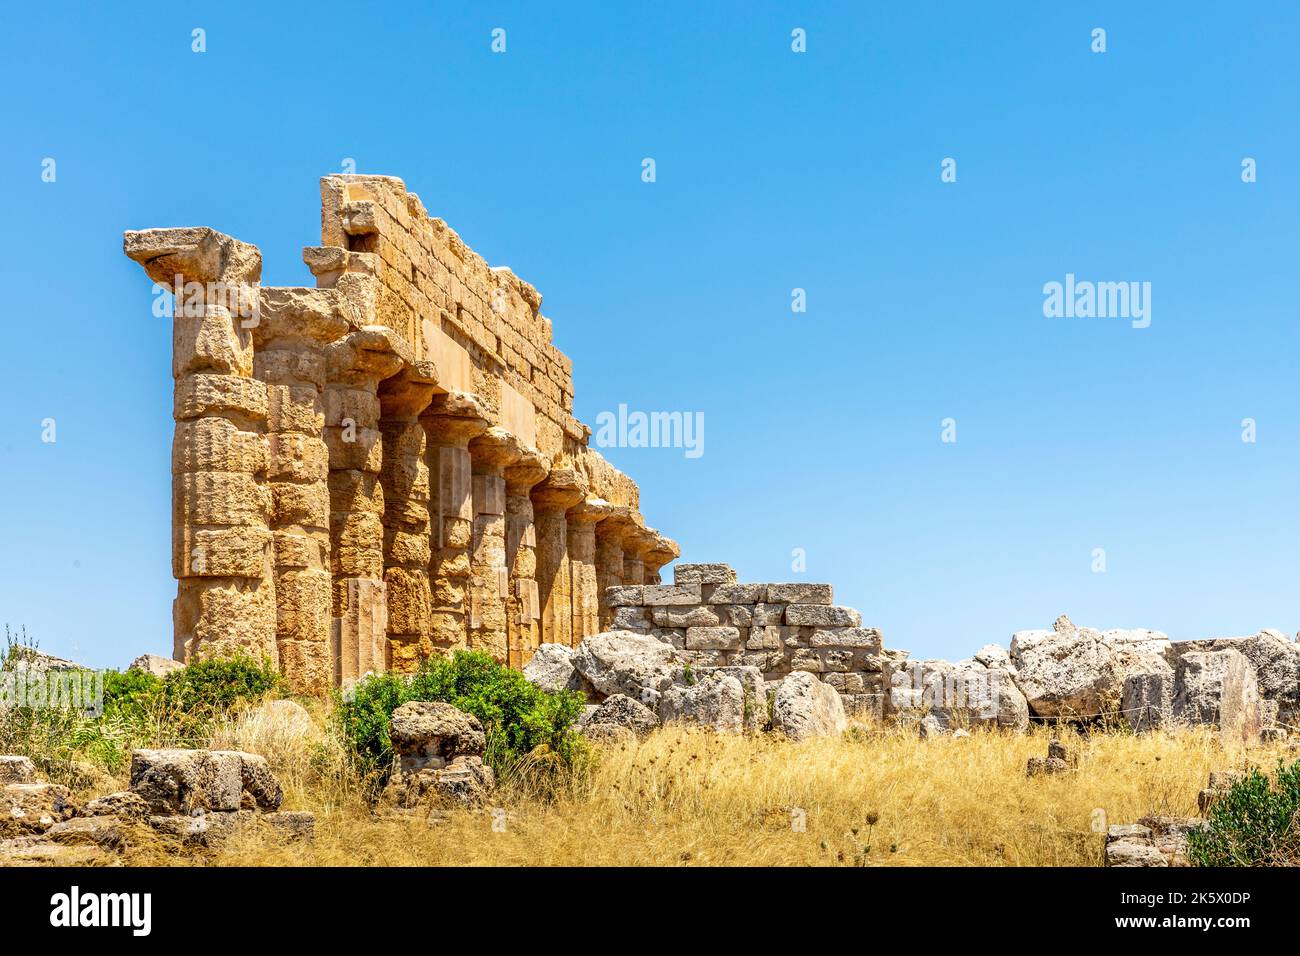 Castelvetrano, Sicily, Italy - July 11, 2020: Ruins in Selinunte, archaeological site and ancient Greek city in Sicily, Italy Stock Photo